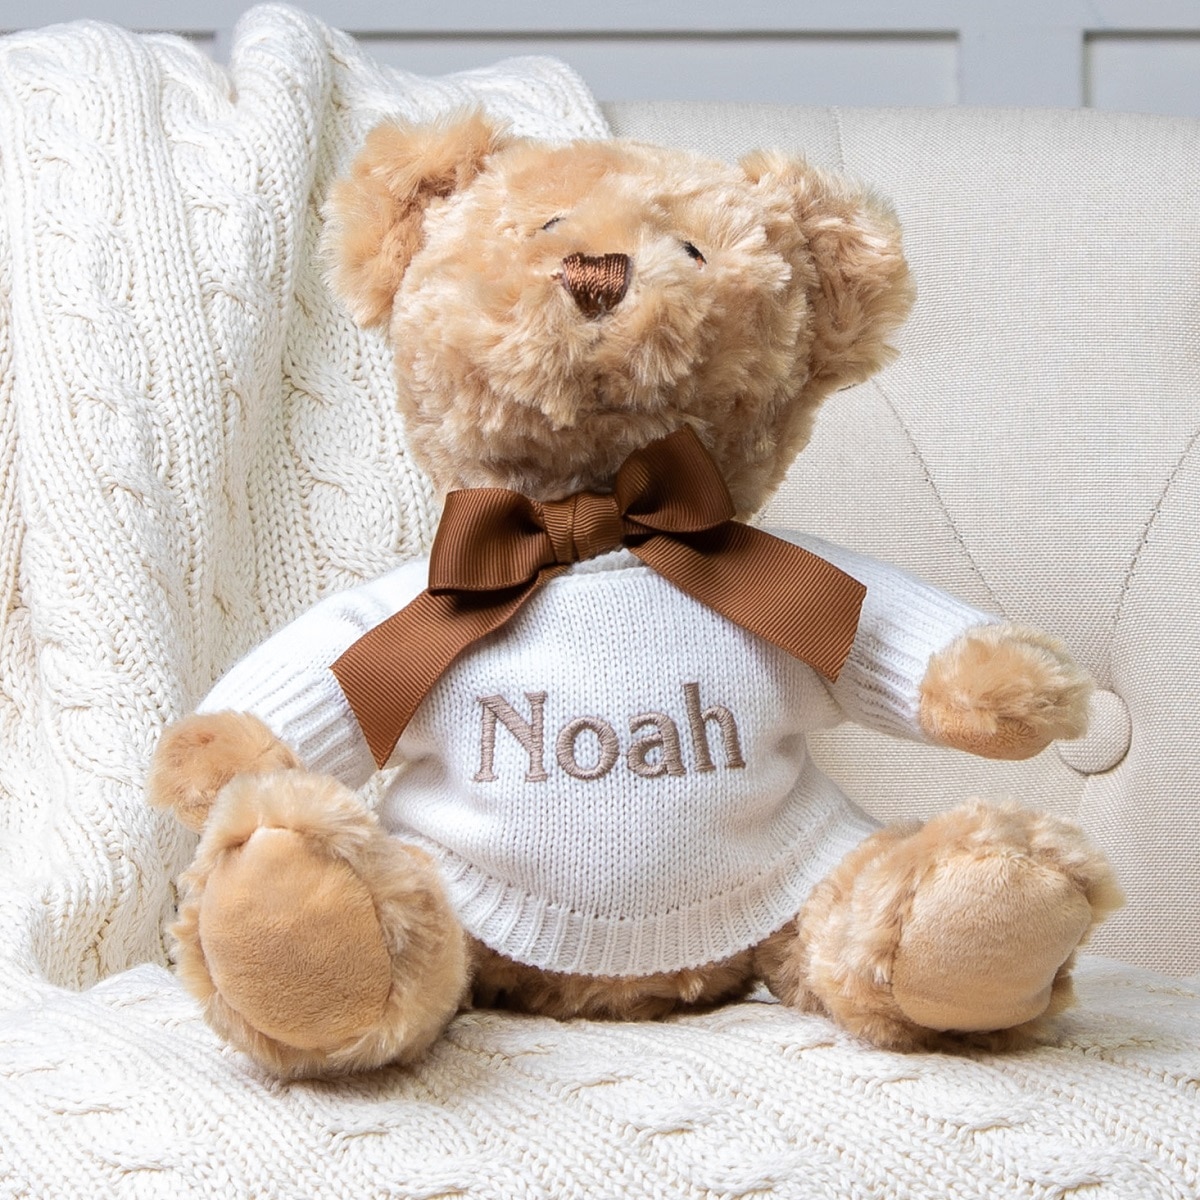 Personalised Toffee Moon luxury cable baby blanket and Keel dougie bear gift set